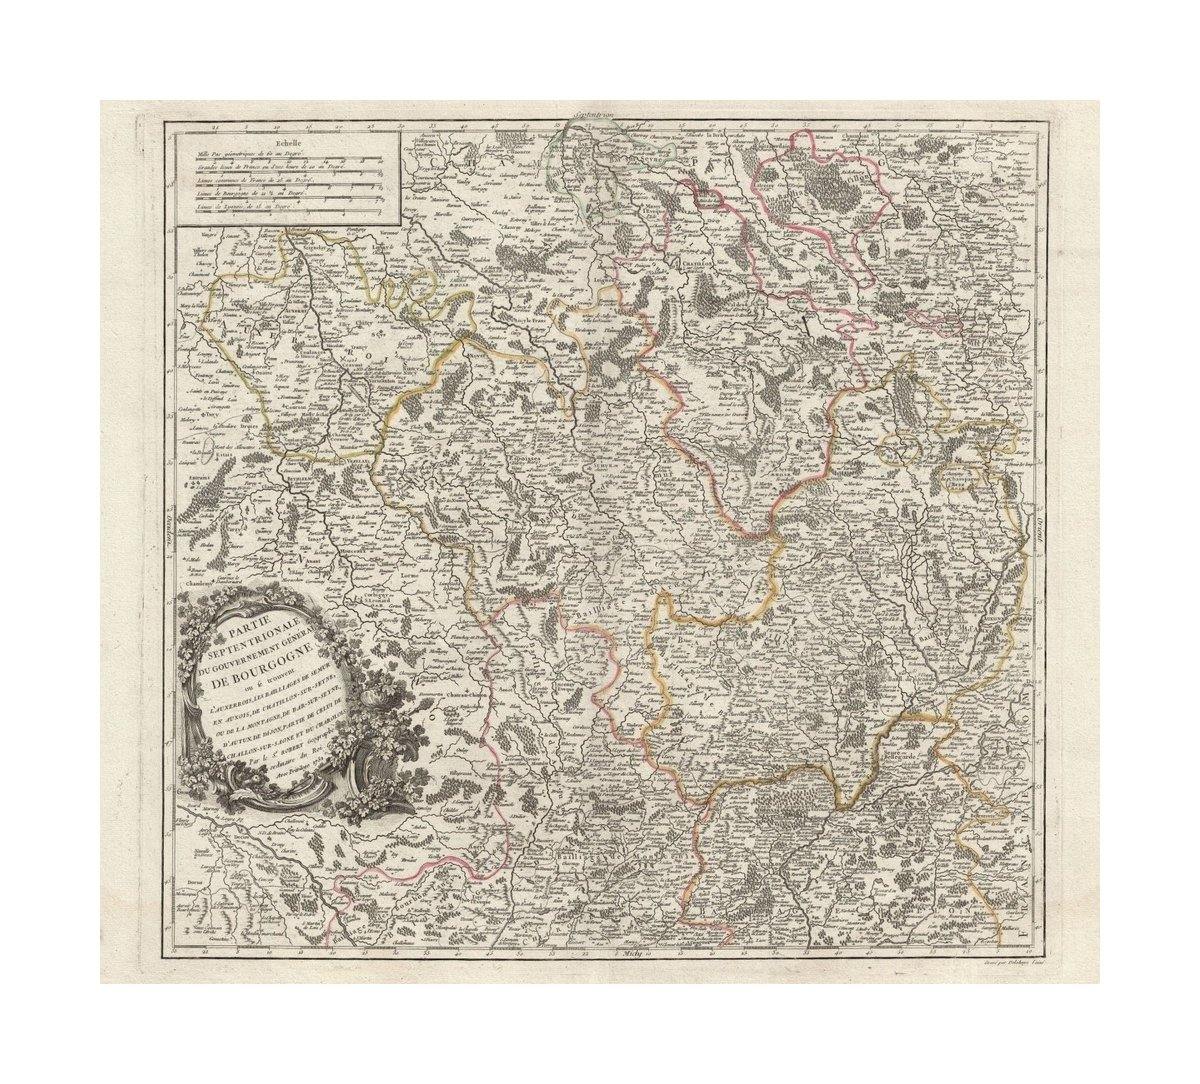 1752 map Burgundy (Bourgogne), France (and Champagne Wine Region) - New York Map Company